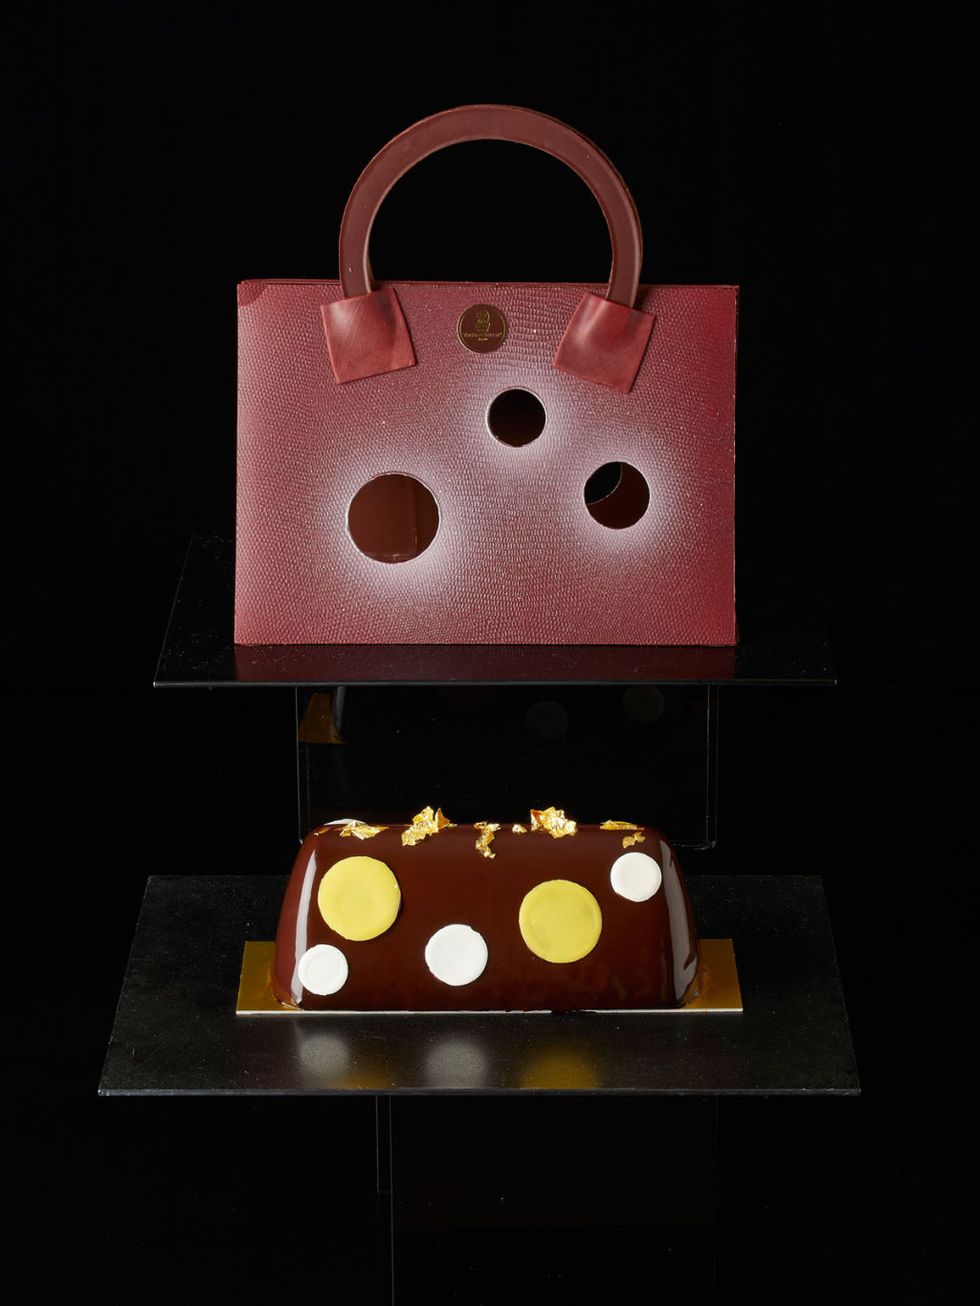 Brown, Design, Bag, Chocolate, Sweetness, Fashion accessory, Still life, Food, Handbag, Packaging and labeling, 